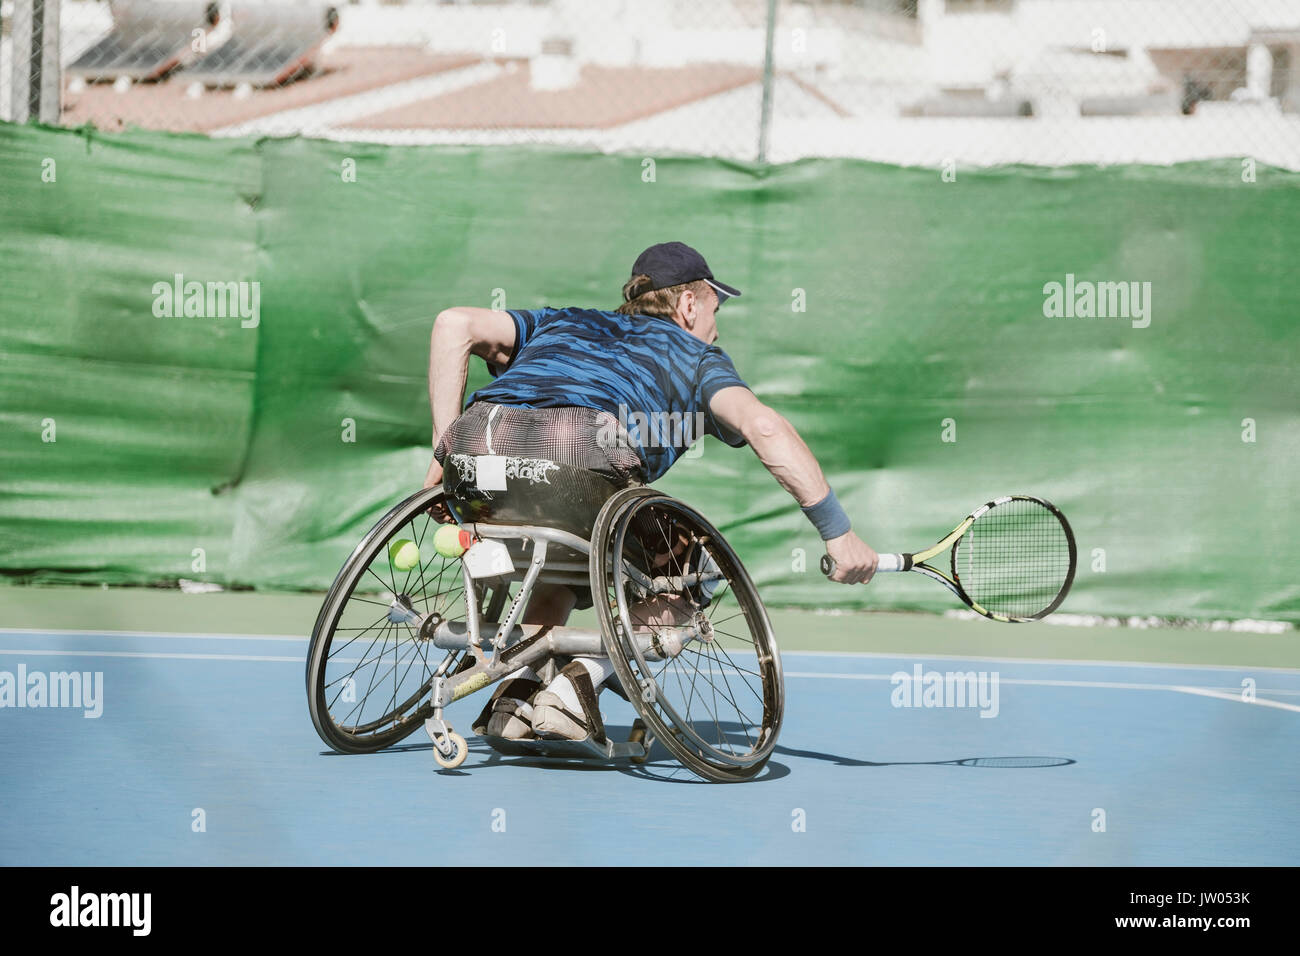 Mature Austrian paralympic tennis player playing on tennis court Stock Photo